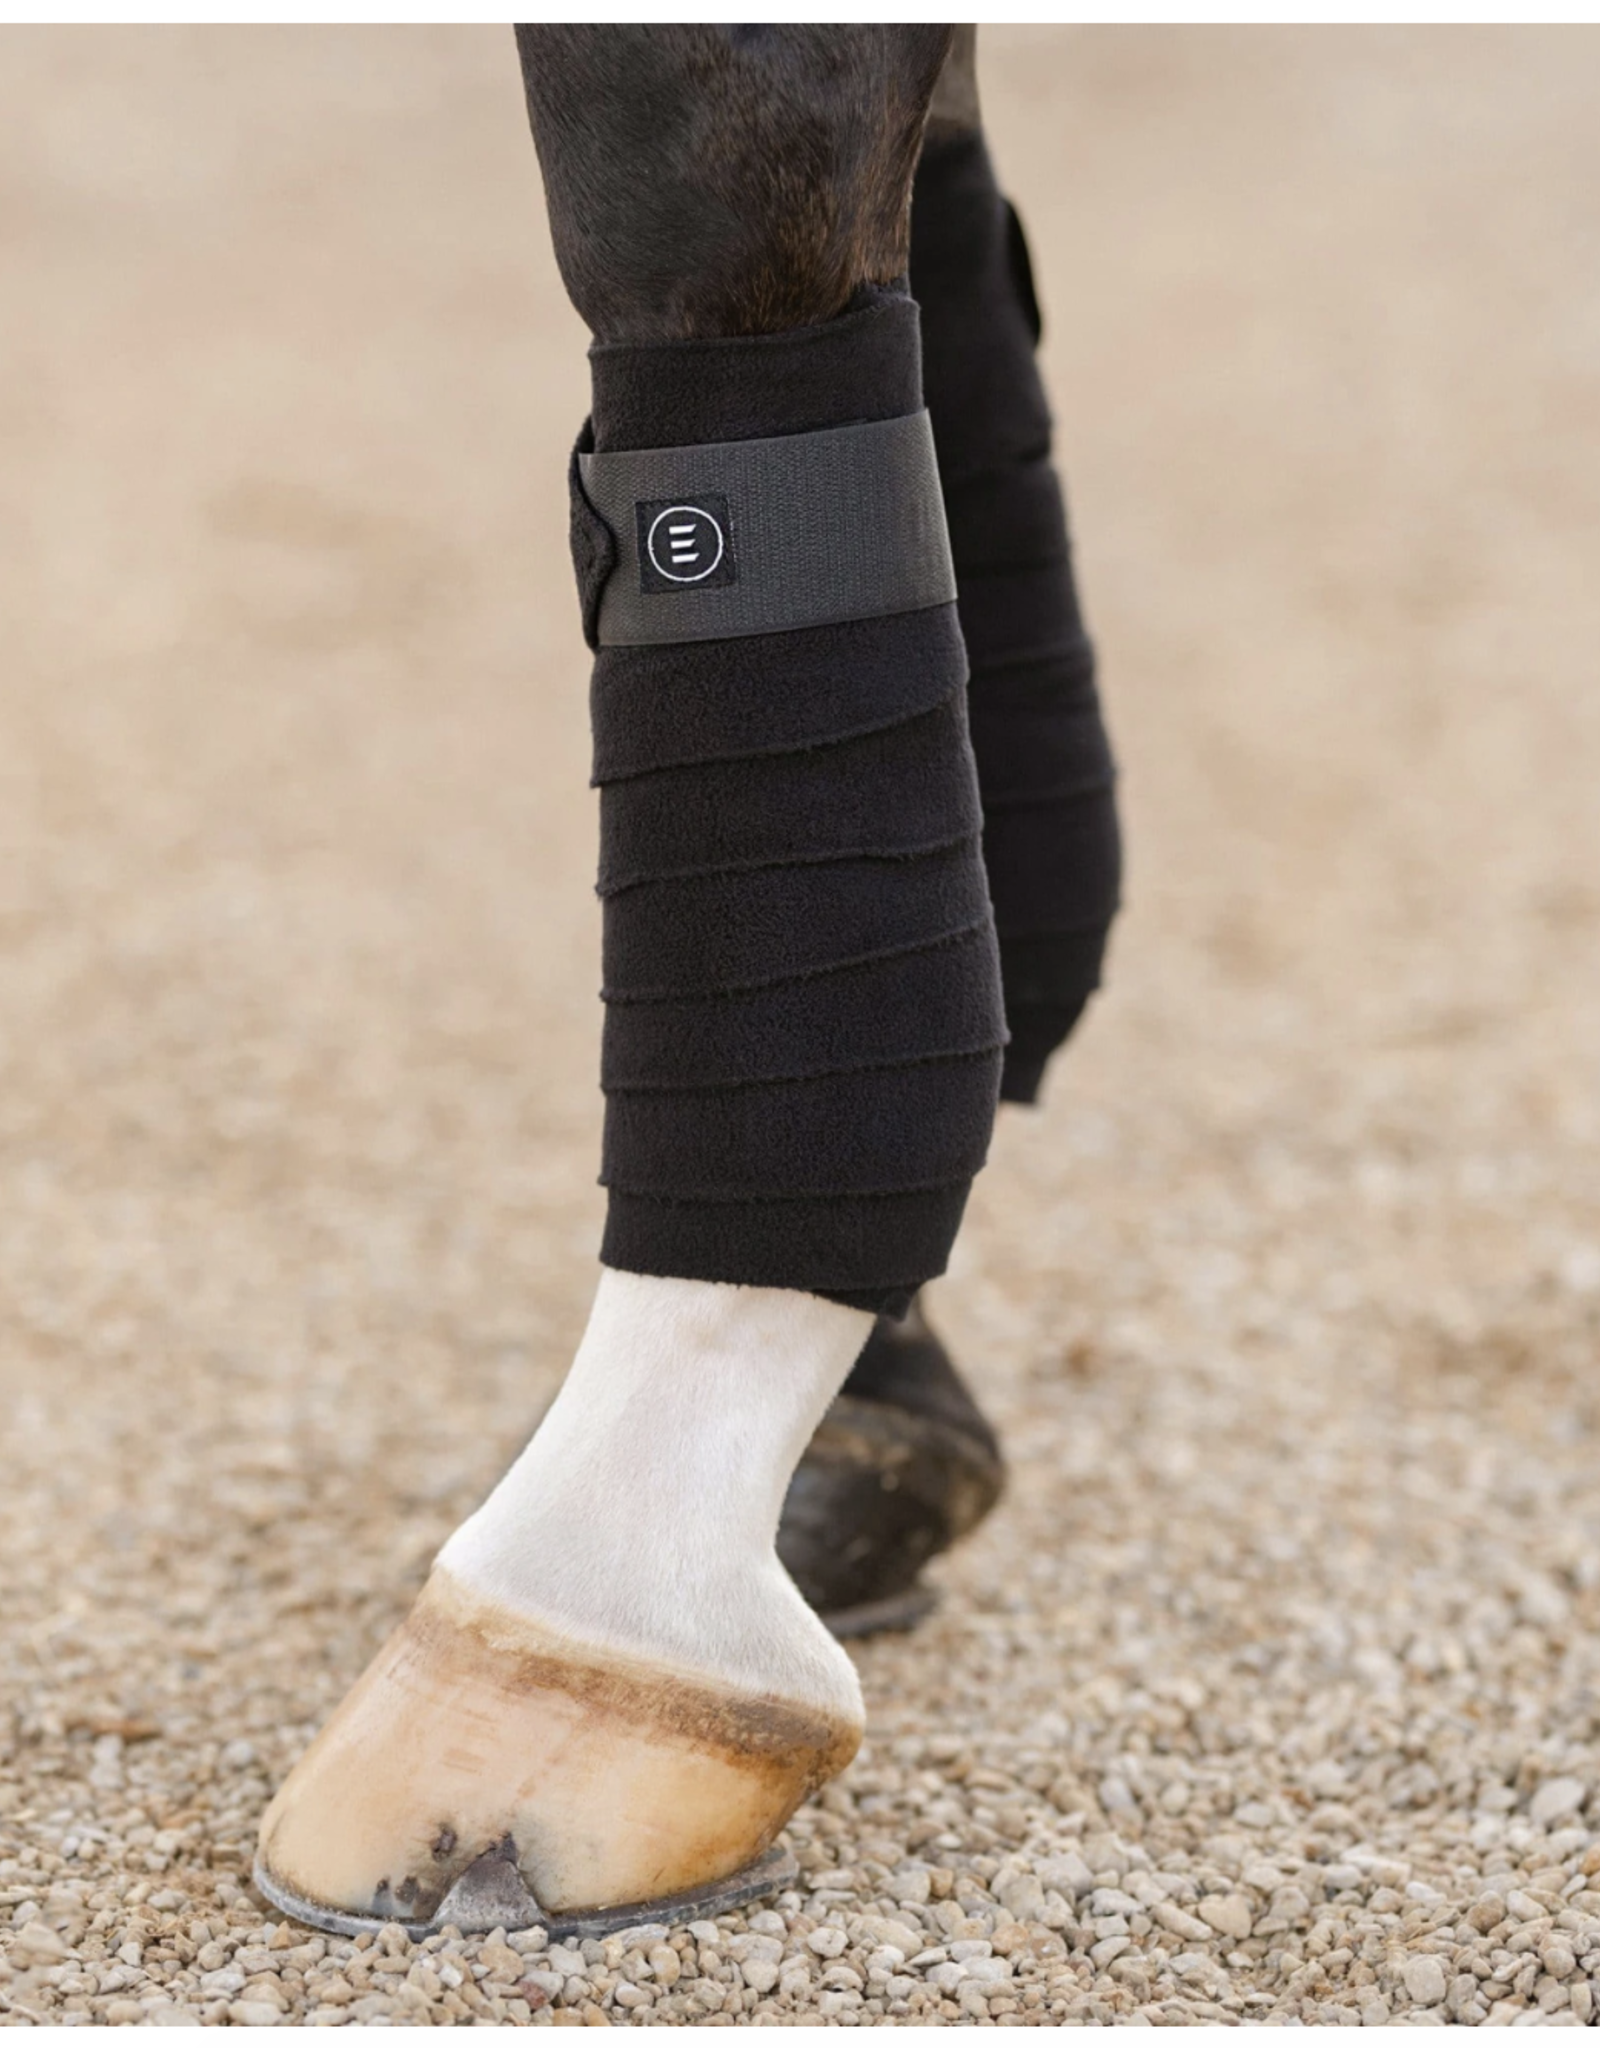 EquiFit Essential Polo Wrap - Pair